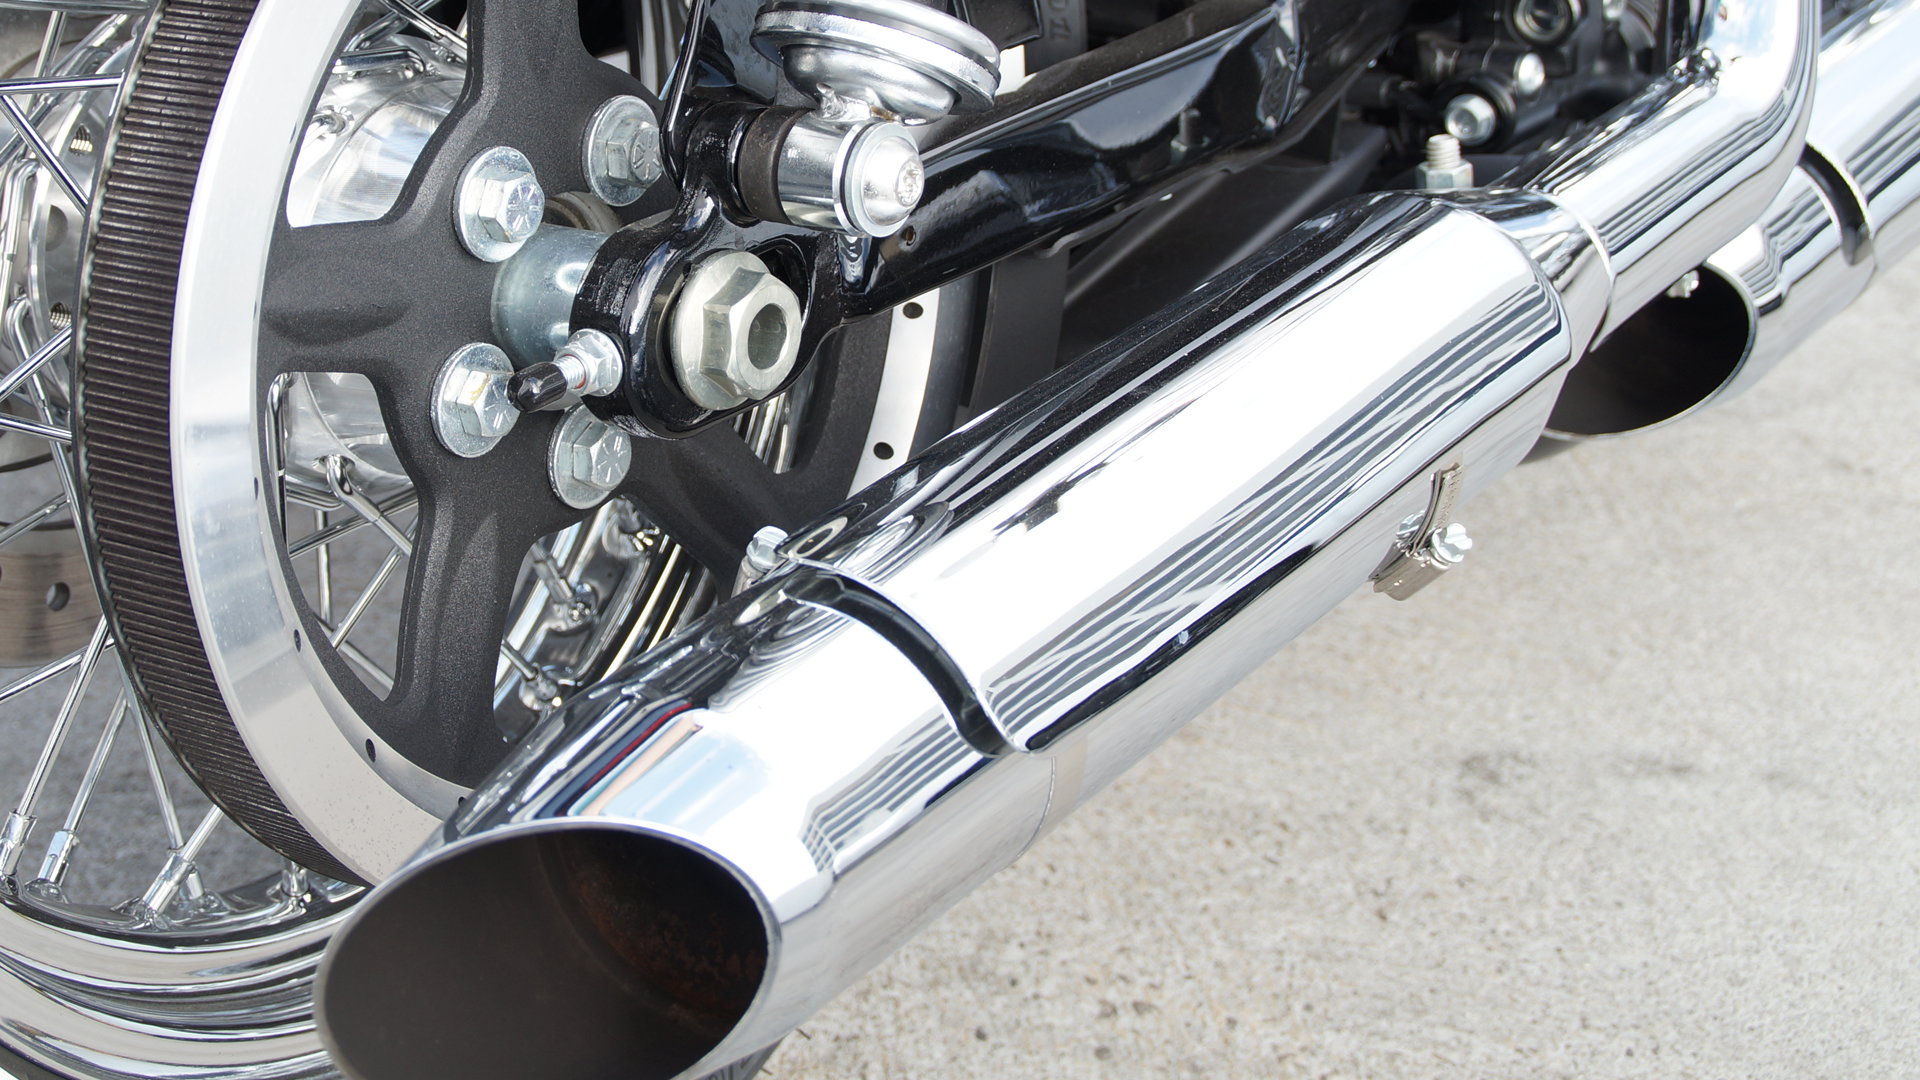 Harley Davidson Sportster Exhaust Reviews And How To Replace Your Exhaust Hdforums